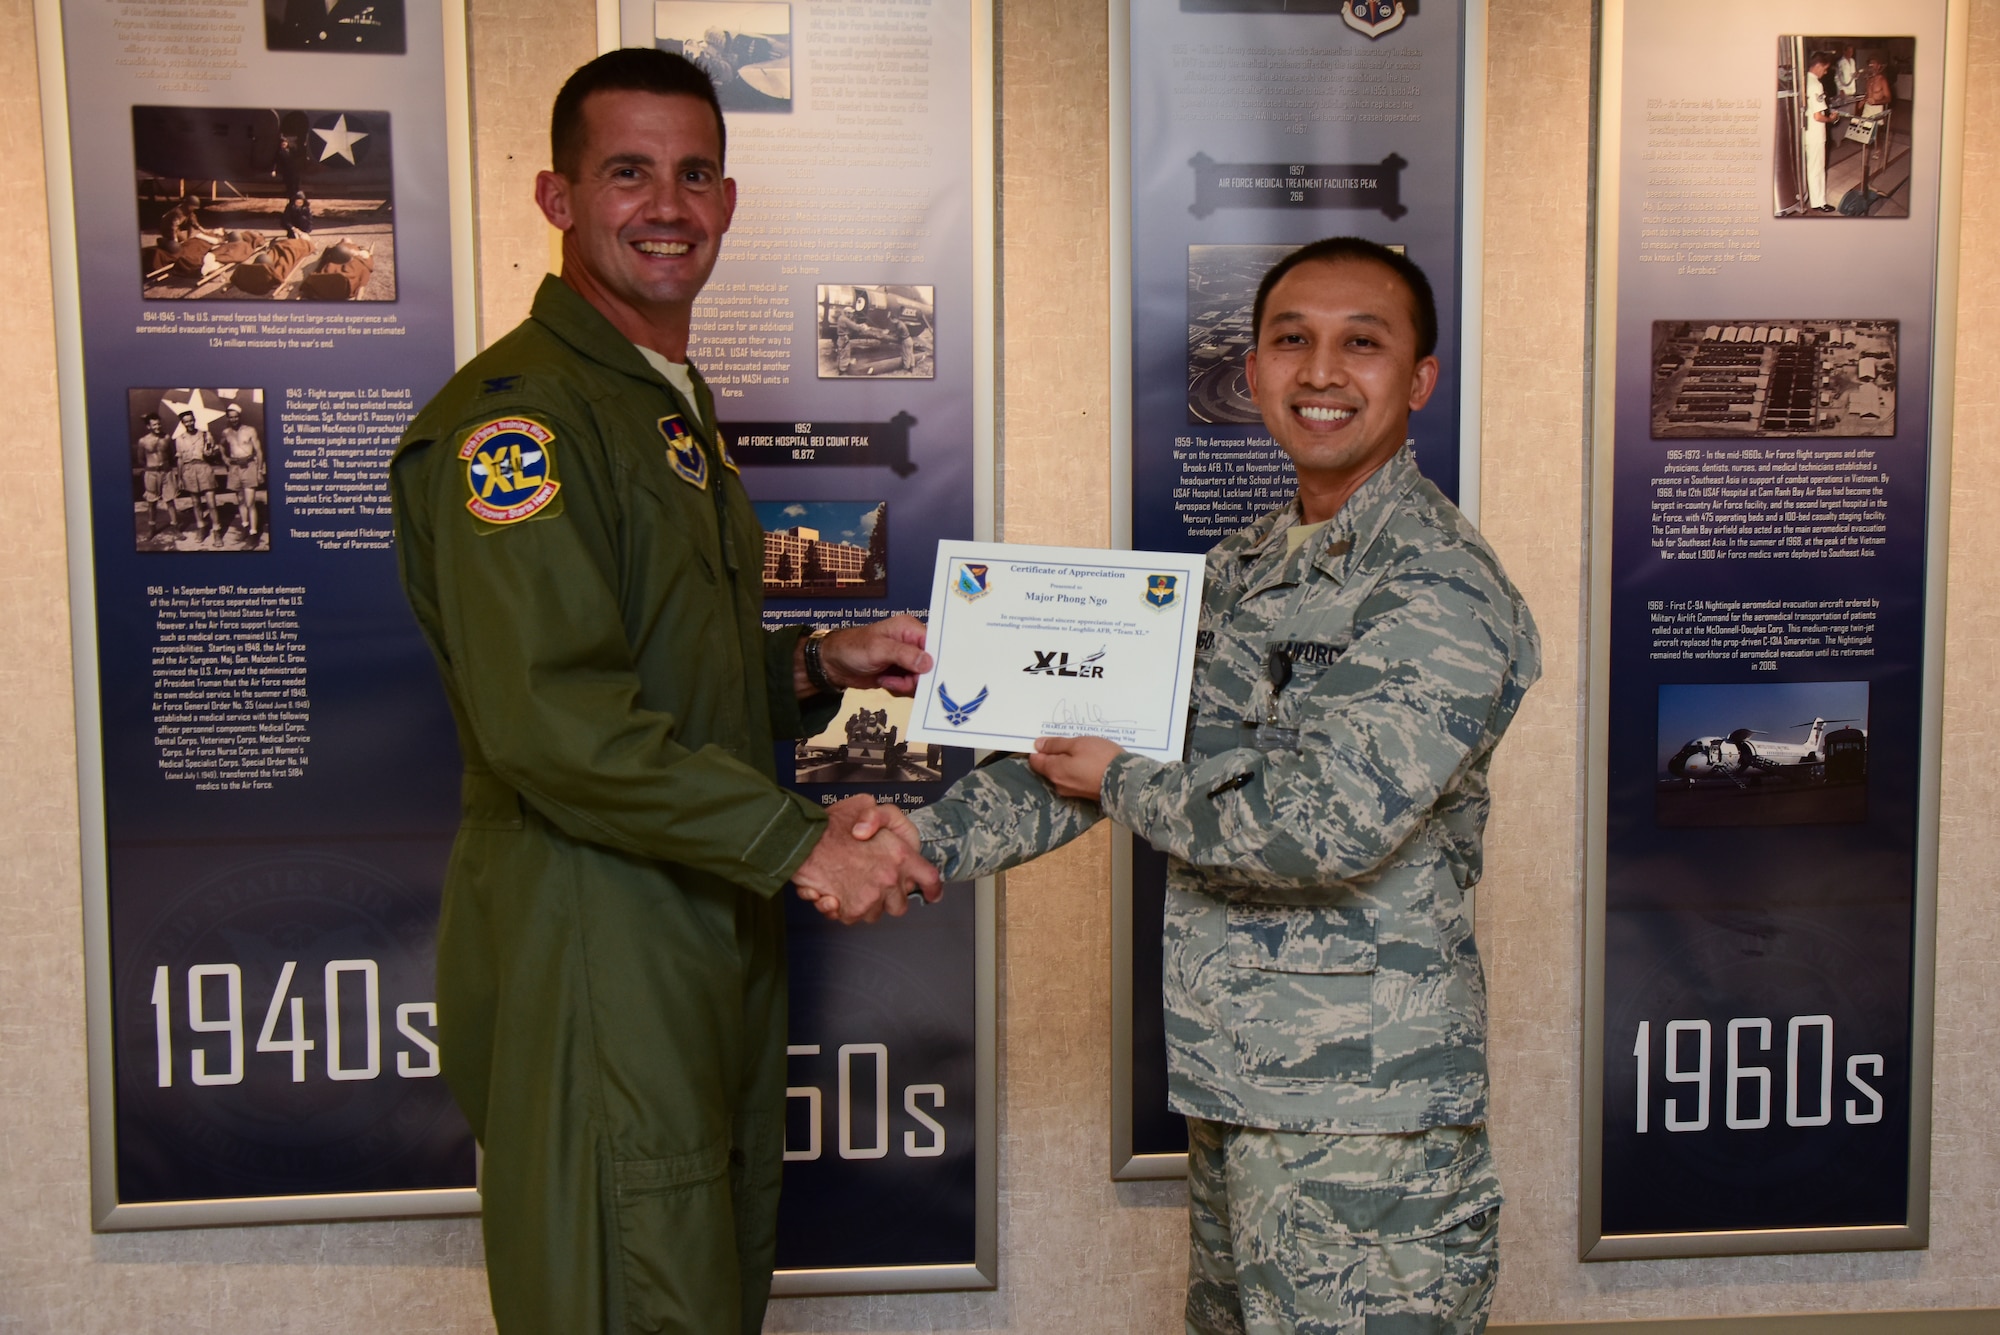 Maj. (Dr.) Phong Ngo, 47th Medical Operations Squadron physician, was chosen by wing leadership to be the “XLer” of the week, for the week of Sept. 10, 2018, at Laughlin Air Force Base, Texas. The “XLer” award, presented by Col. Charlie Velino, 47th Flying Training Wing commander, is given to those who consistently make outstanding contributions to their unit and the Laughlin mission. (U.S. Air Force photo by Airman 1st Class Marco A. Gomez)